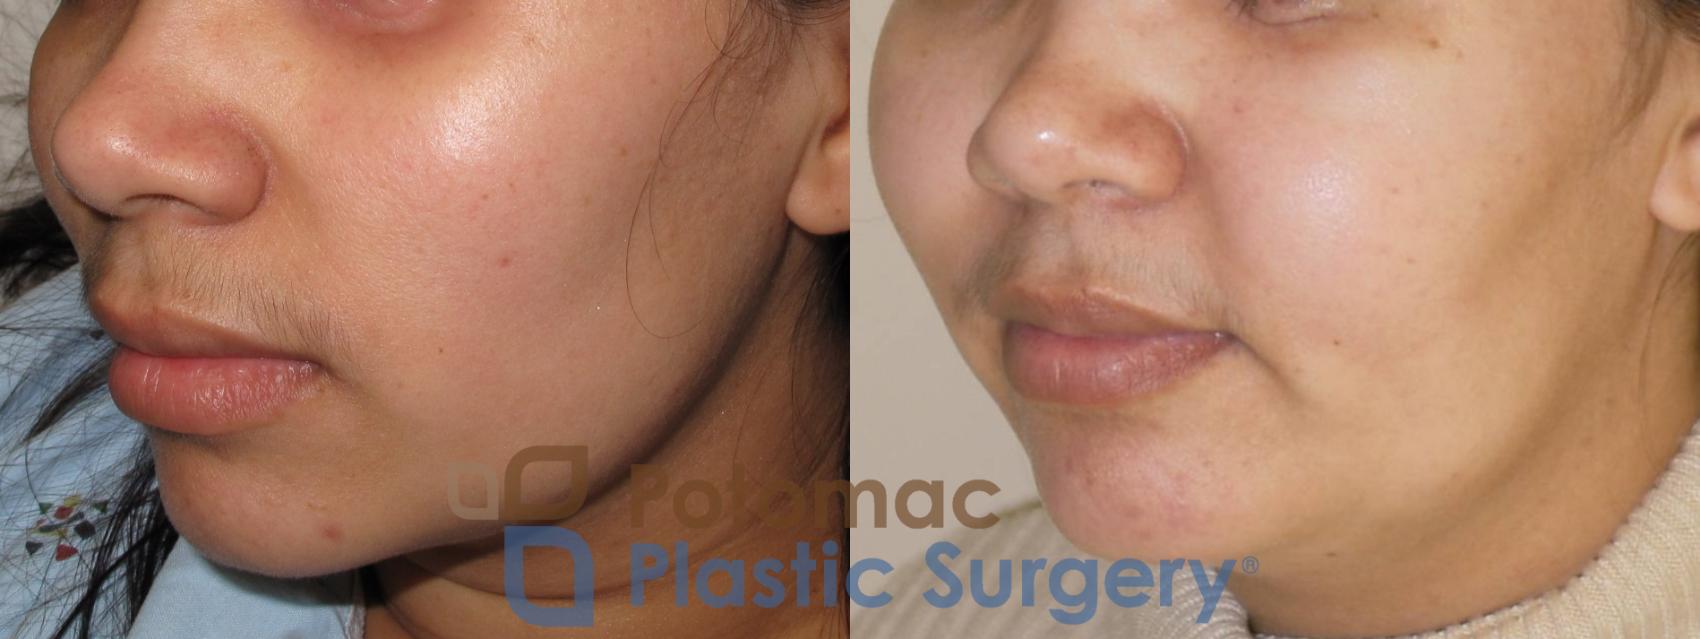 Cheek Augmentation With Silicone Implant And Fat Transfer To Balance The Face Of A Young Woman 